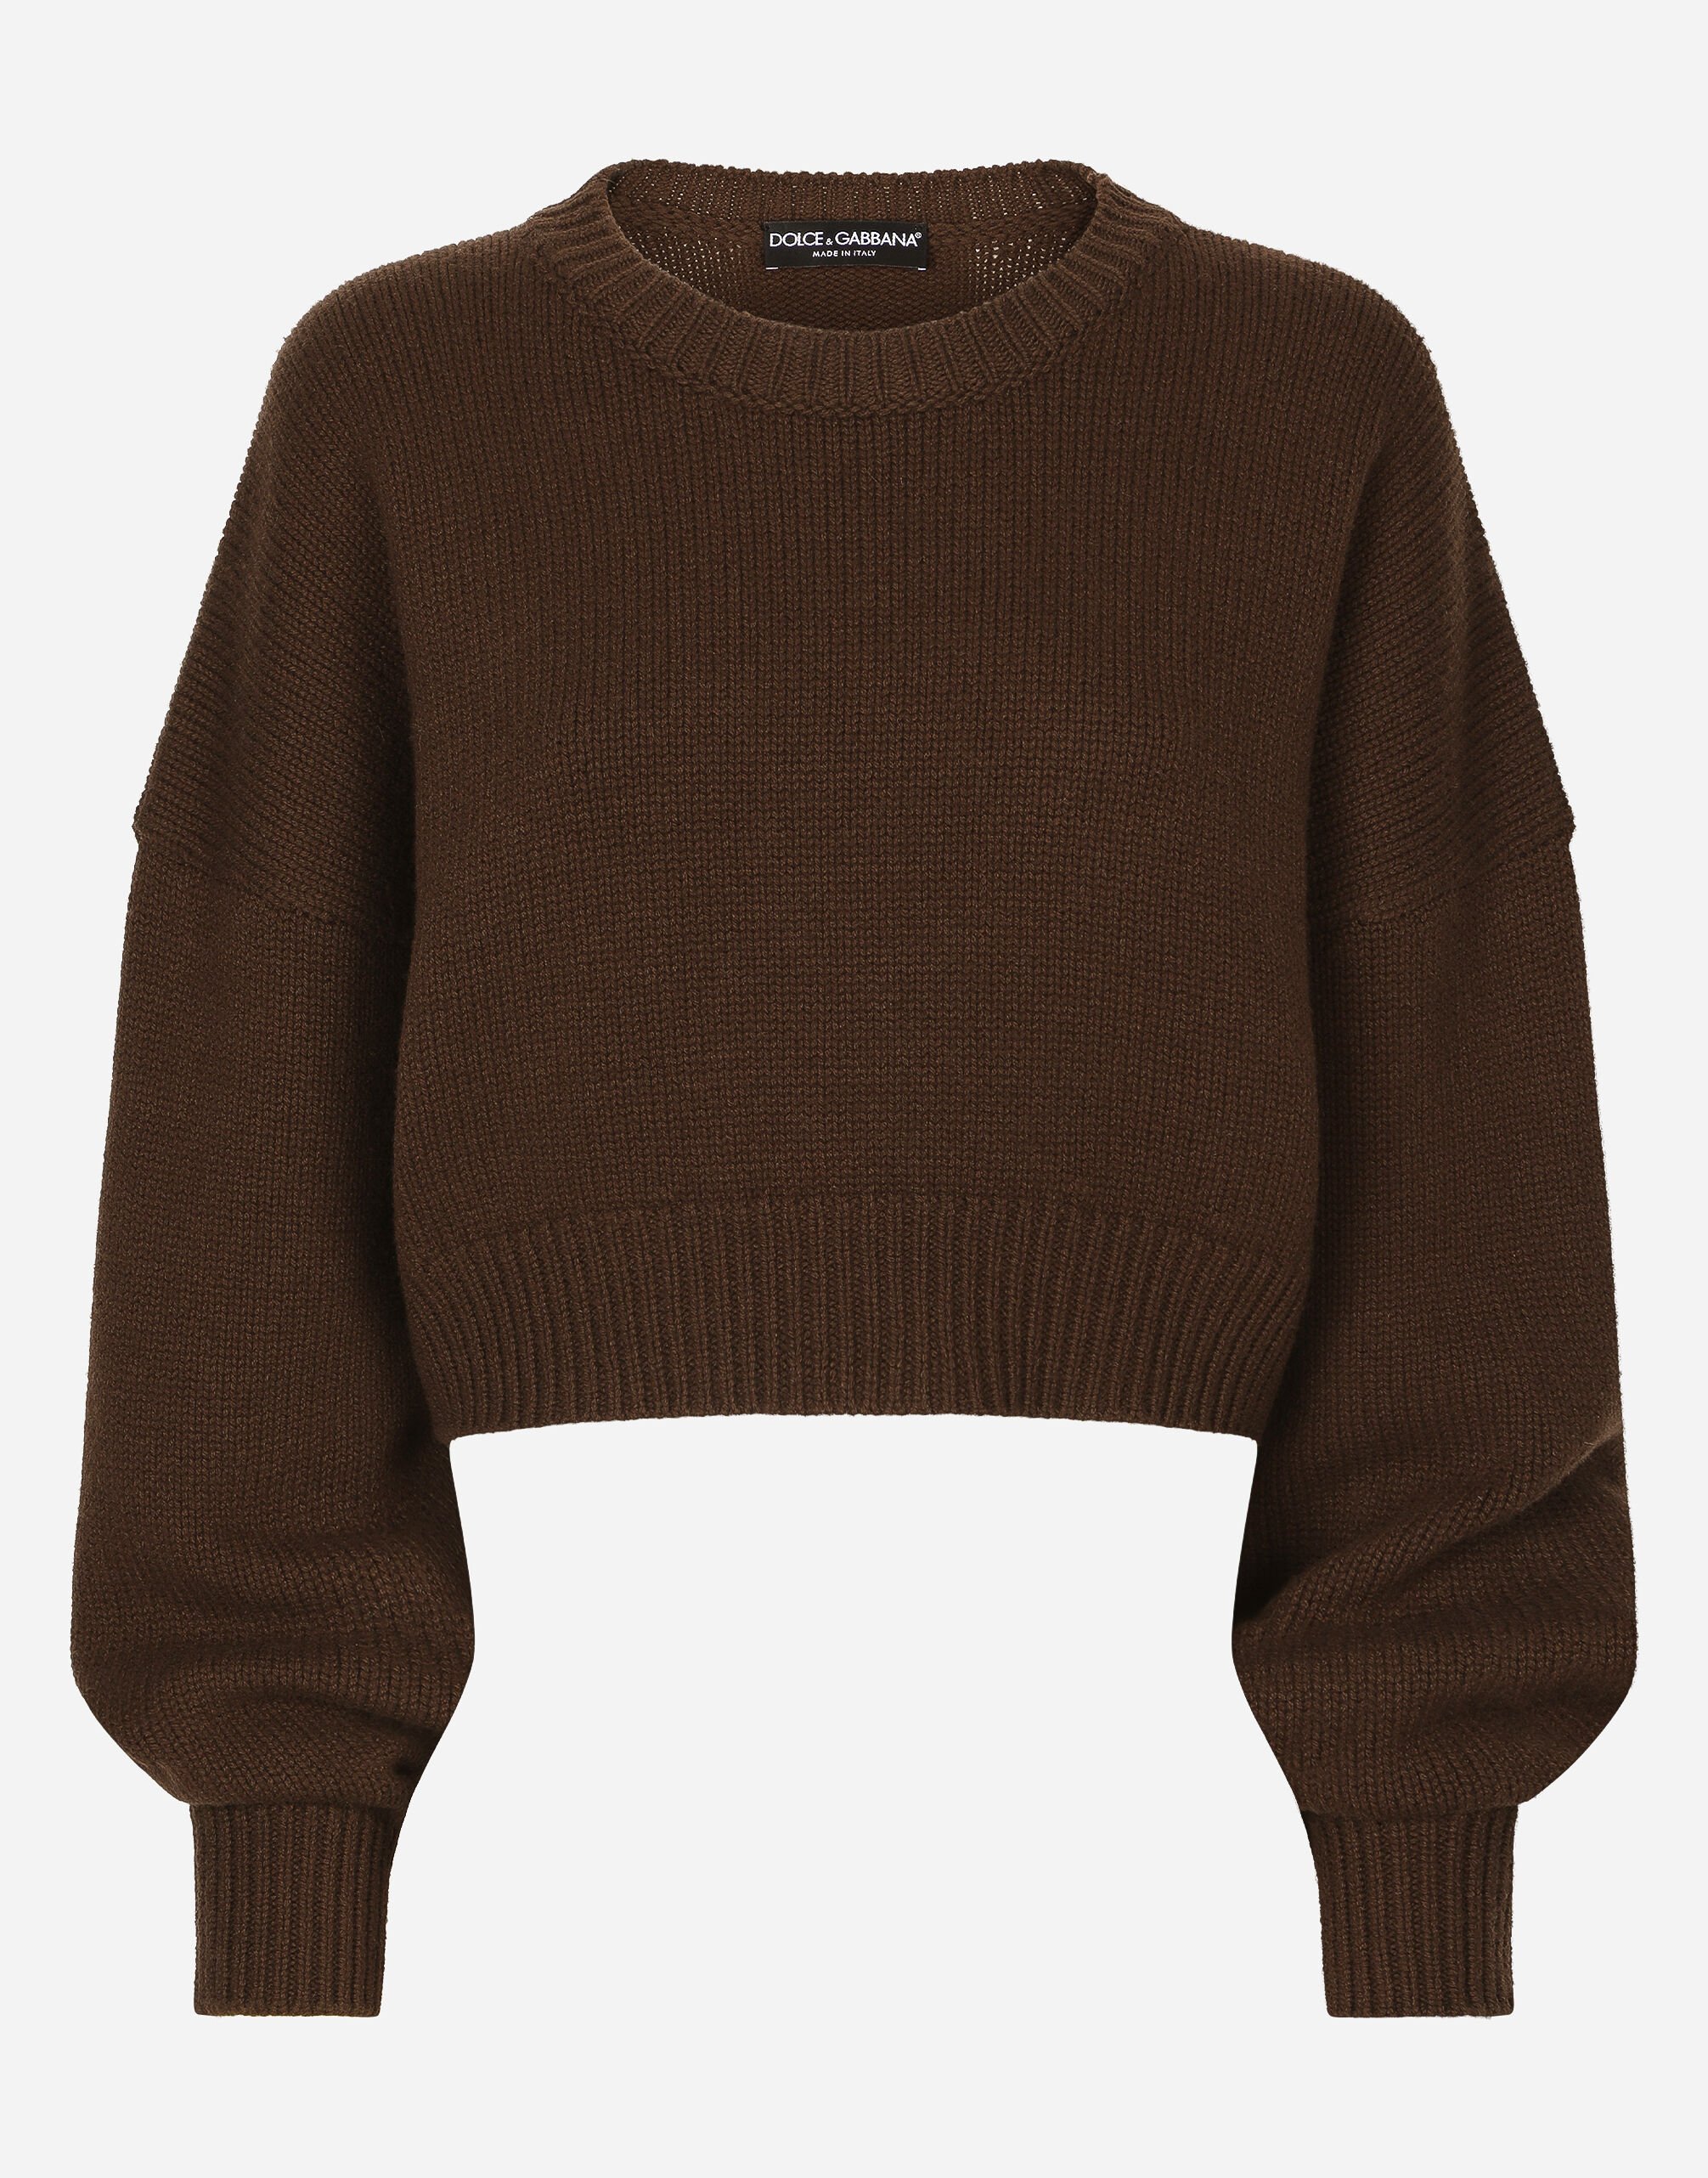 Dolce & Gabbana Wool and cashmere round-neck sweater Multicolor FXM23TJCVO8